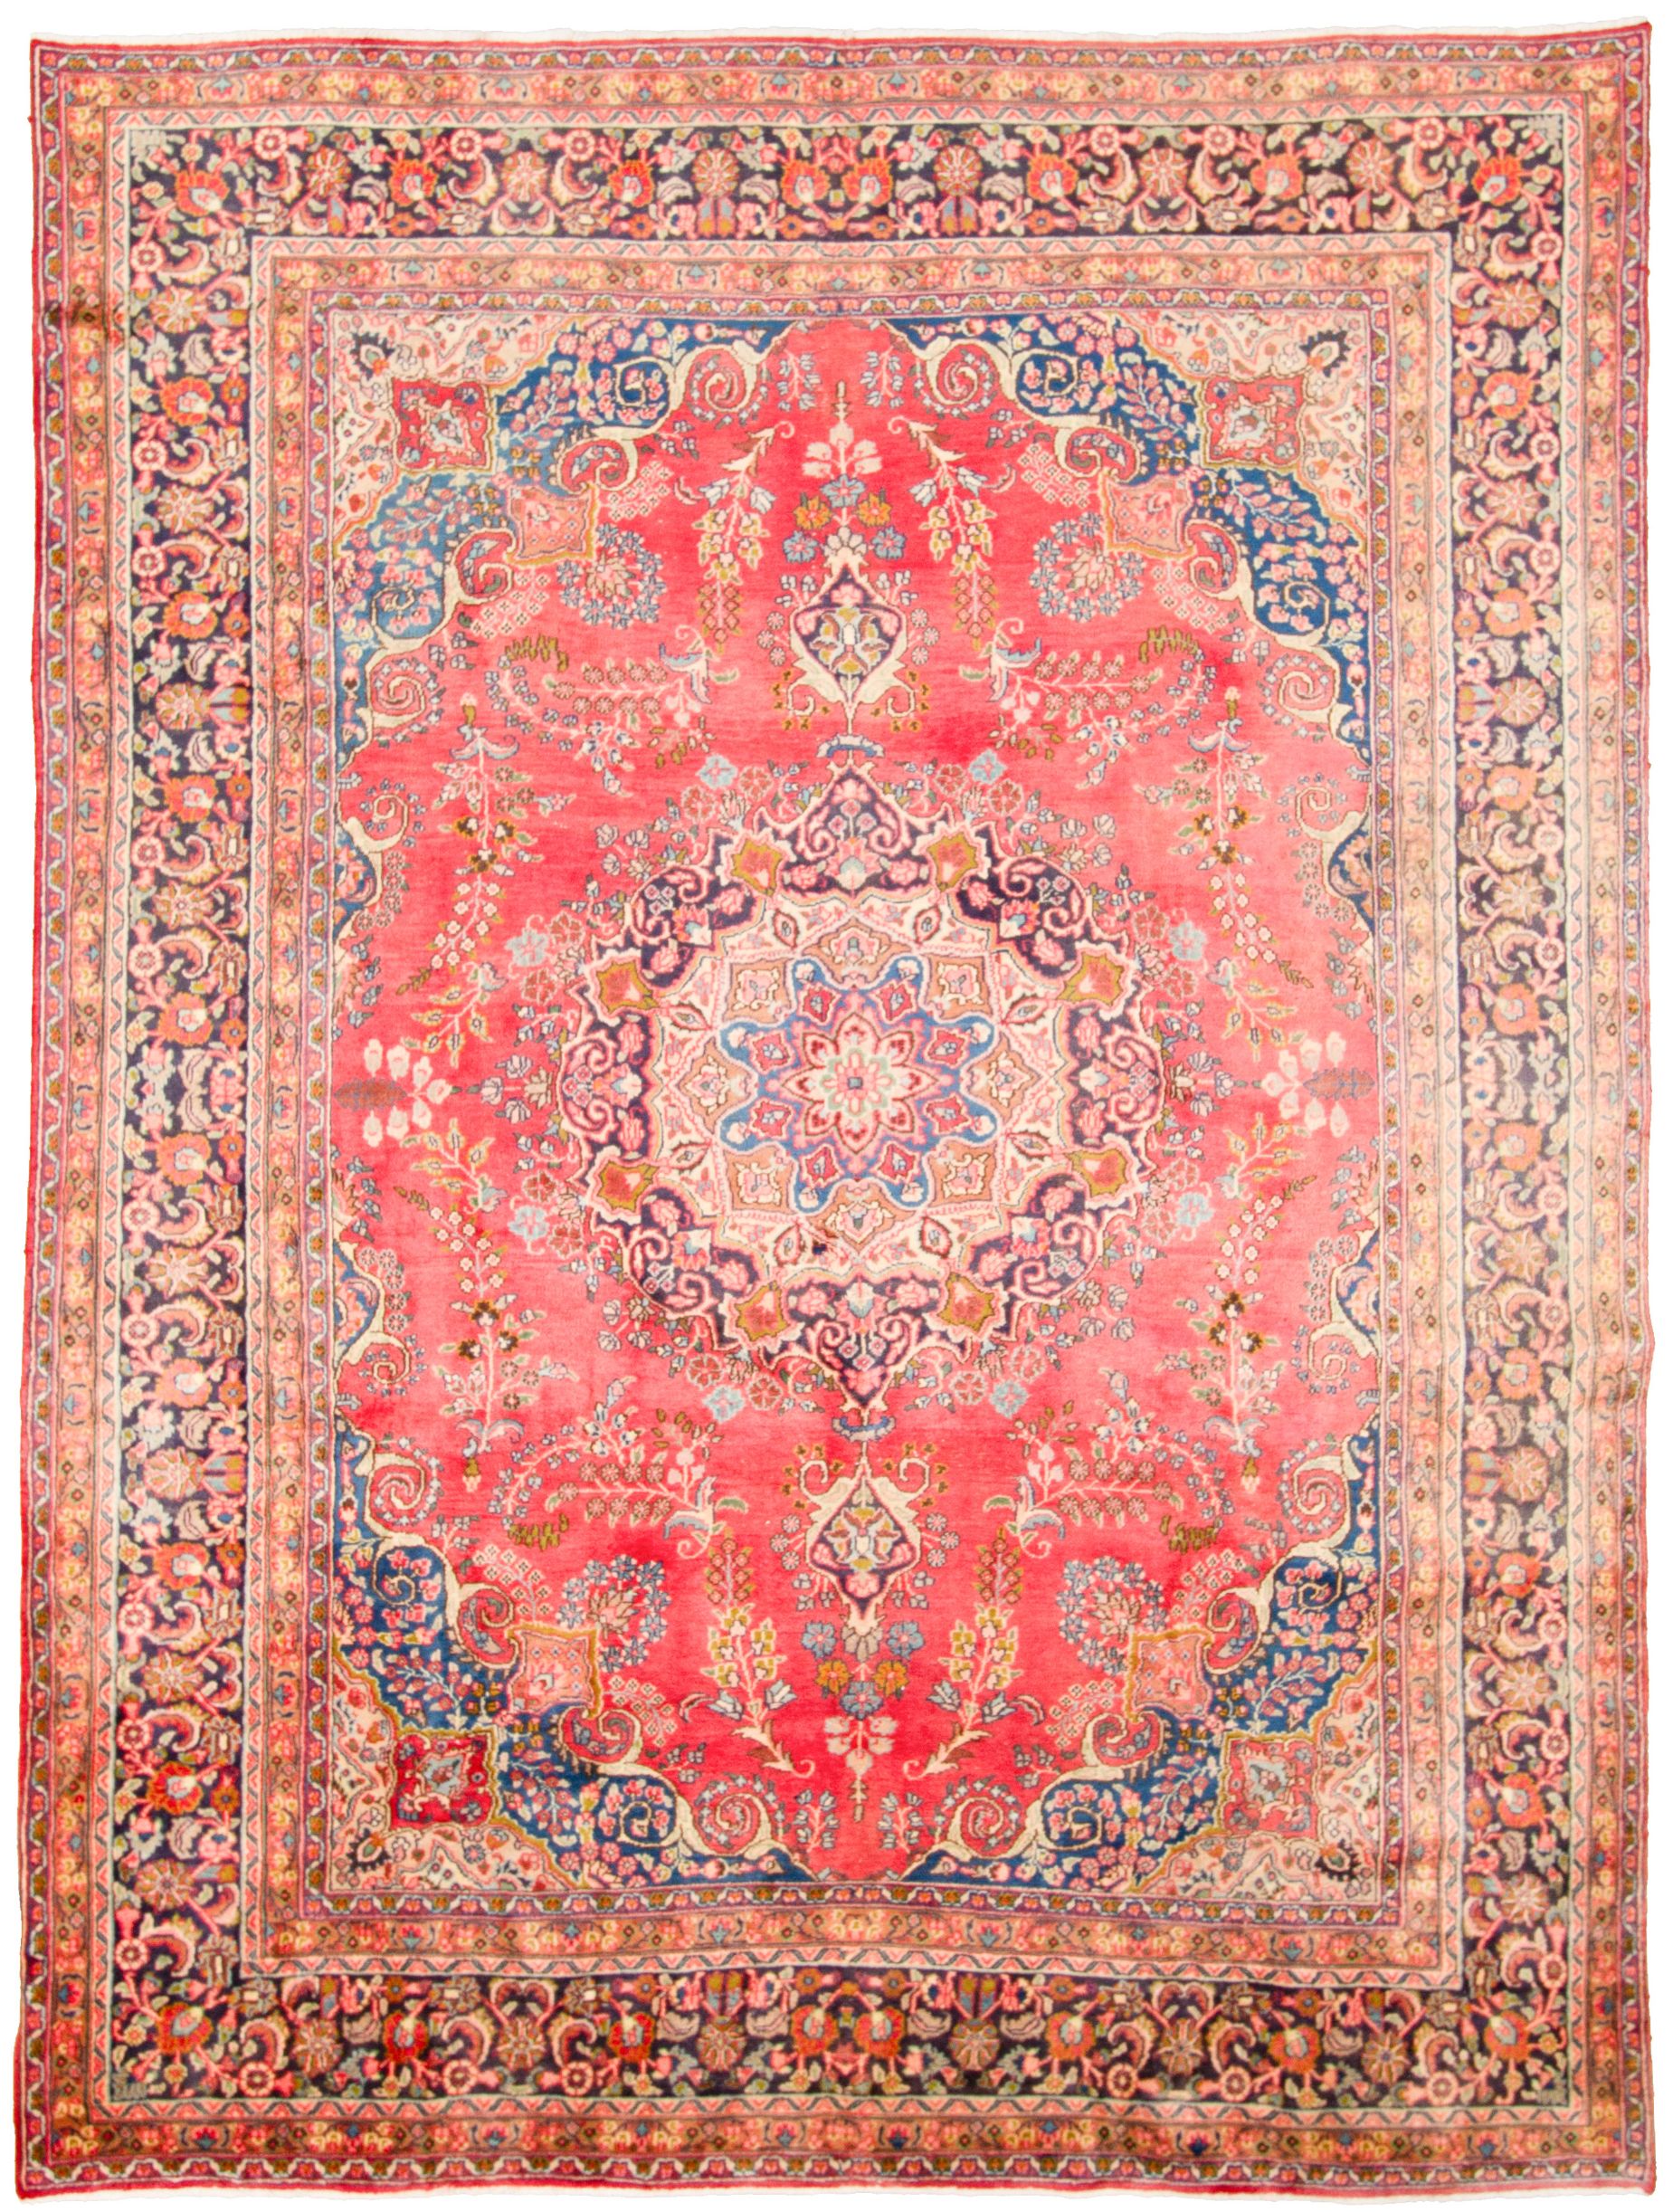 Hand-knotted Sabzevar  Wool Rug 9'8" x 12'11" Size: 9'8" x 12'11"  